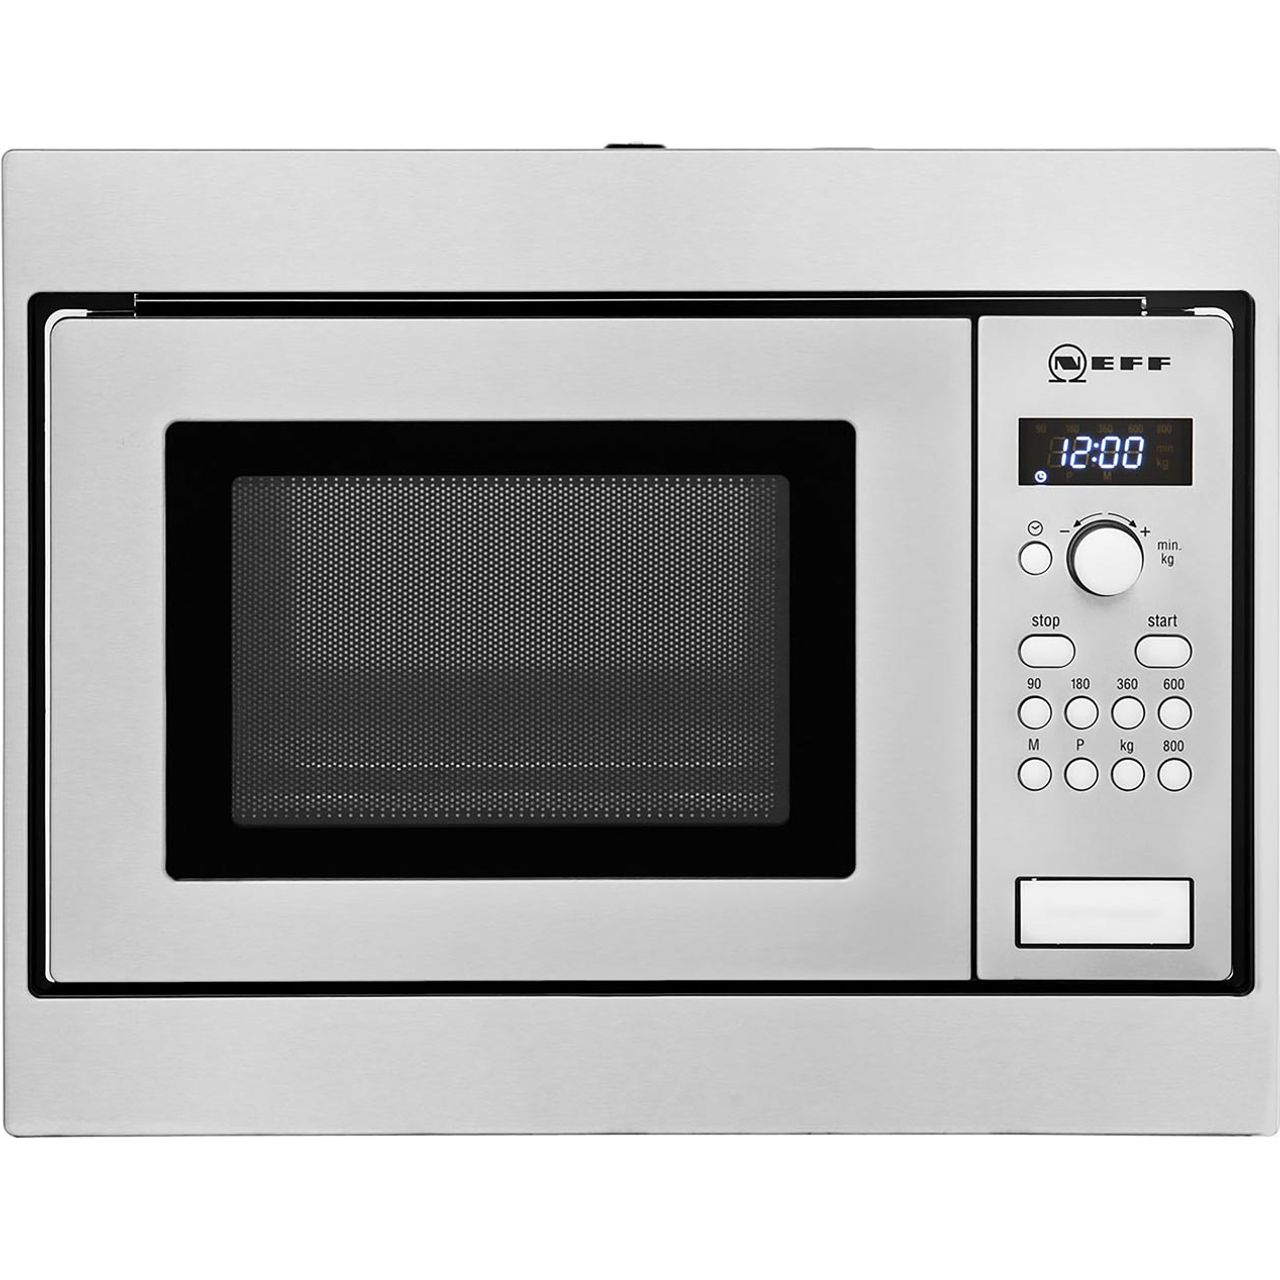 NEFF Classic Collection 3 H53W50N3GB Narrow Width Built In Microwave Review